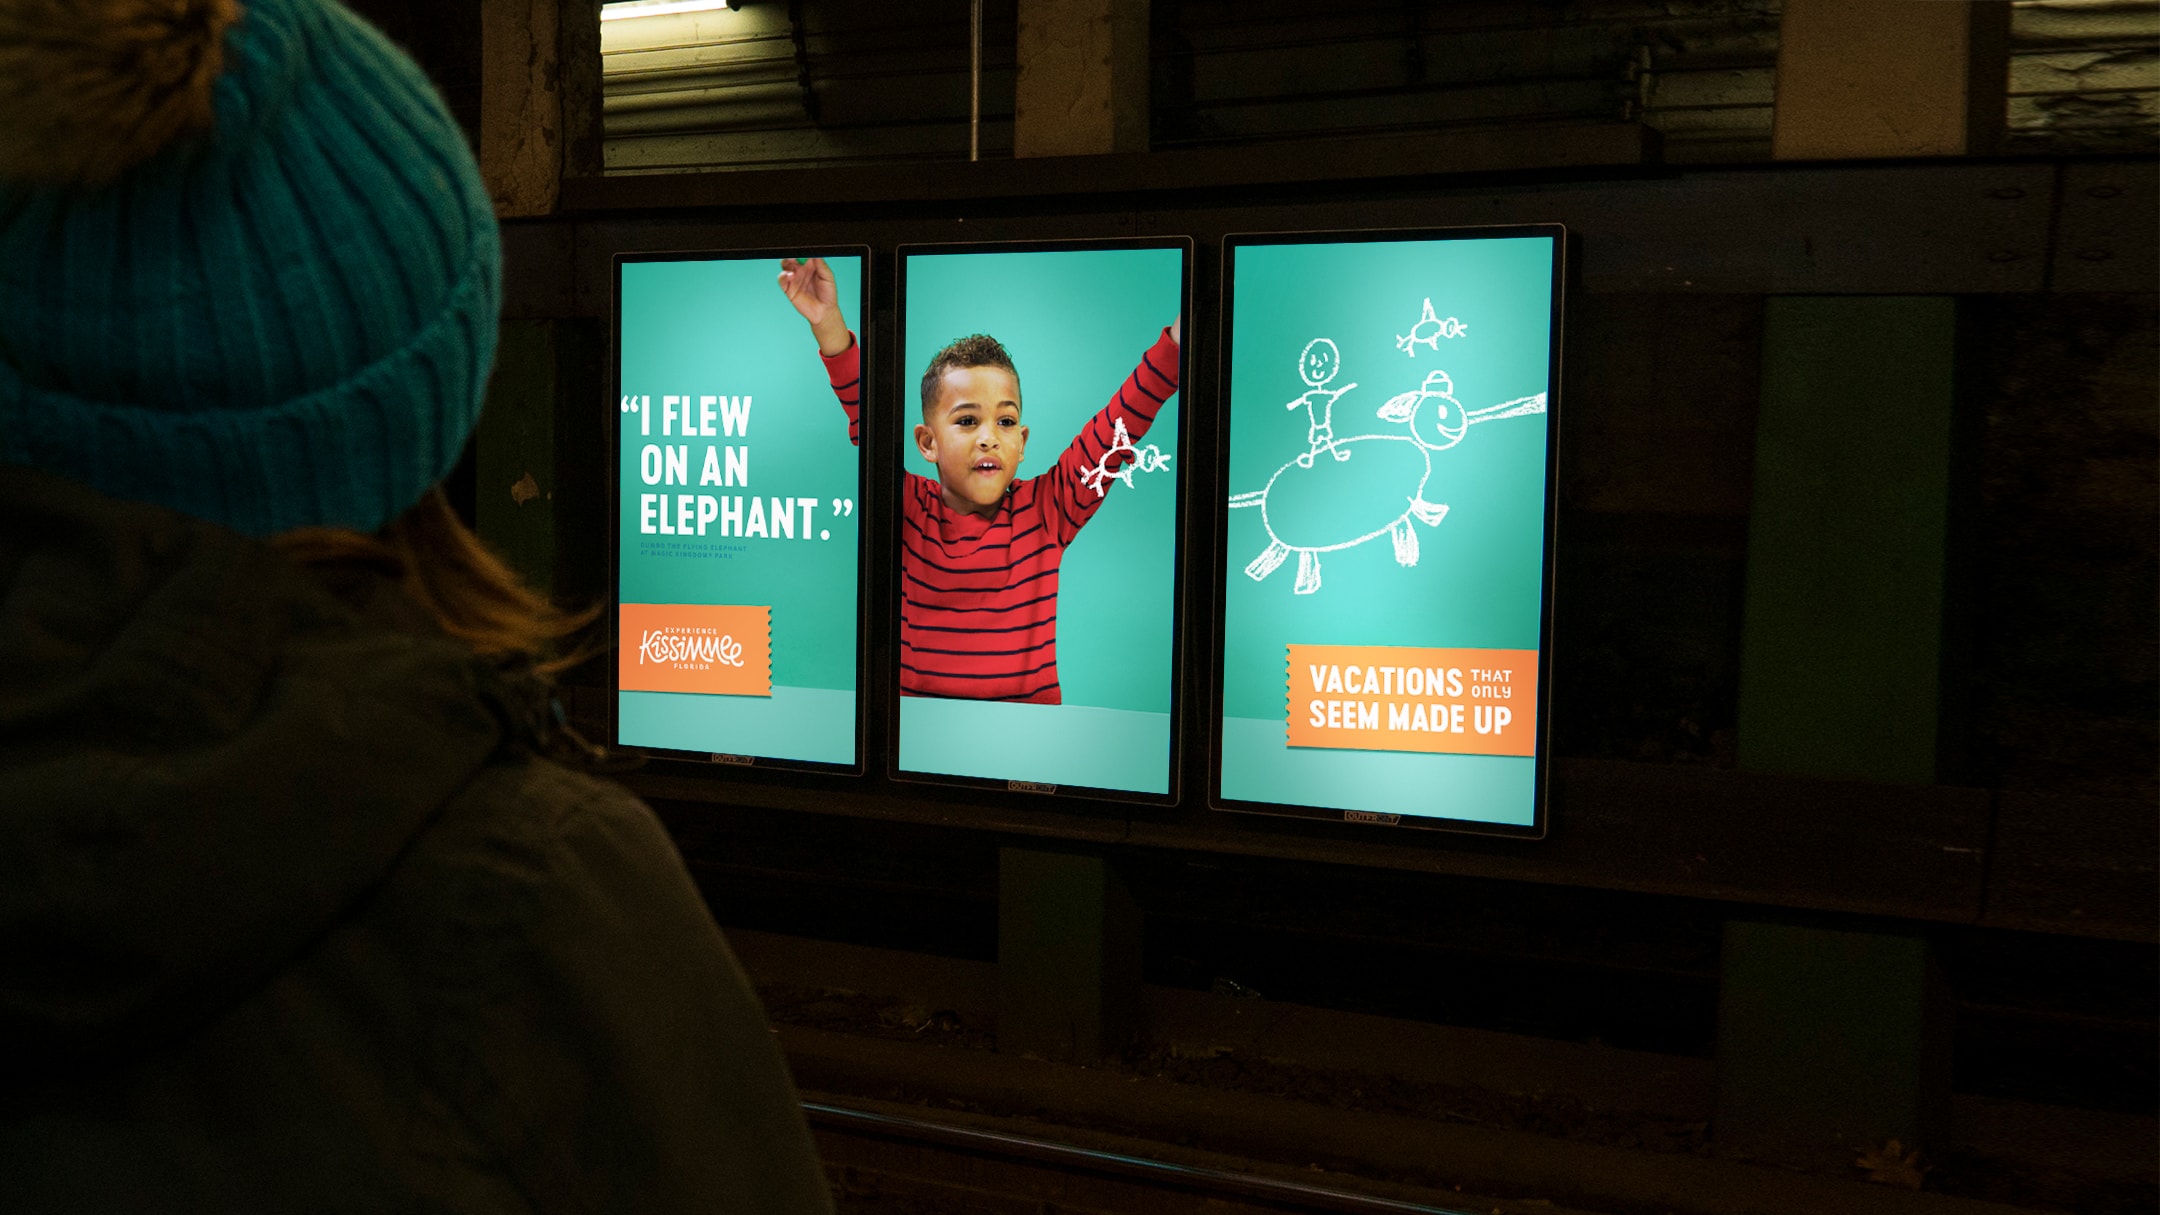 Example of our creative campaign and media planning for Experience Kissimmee's winter campaign. This ad was featured in a subway station.